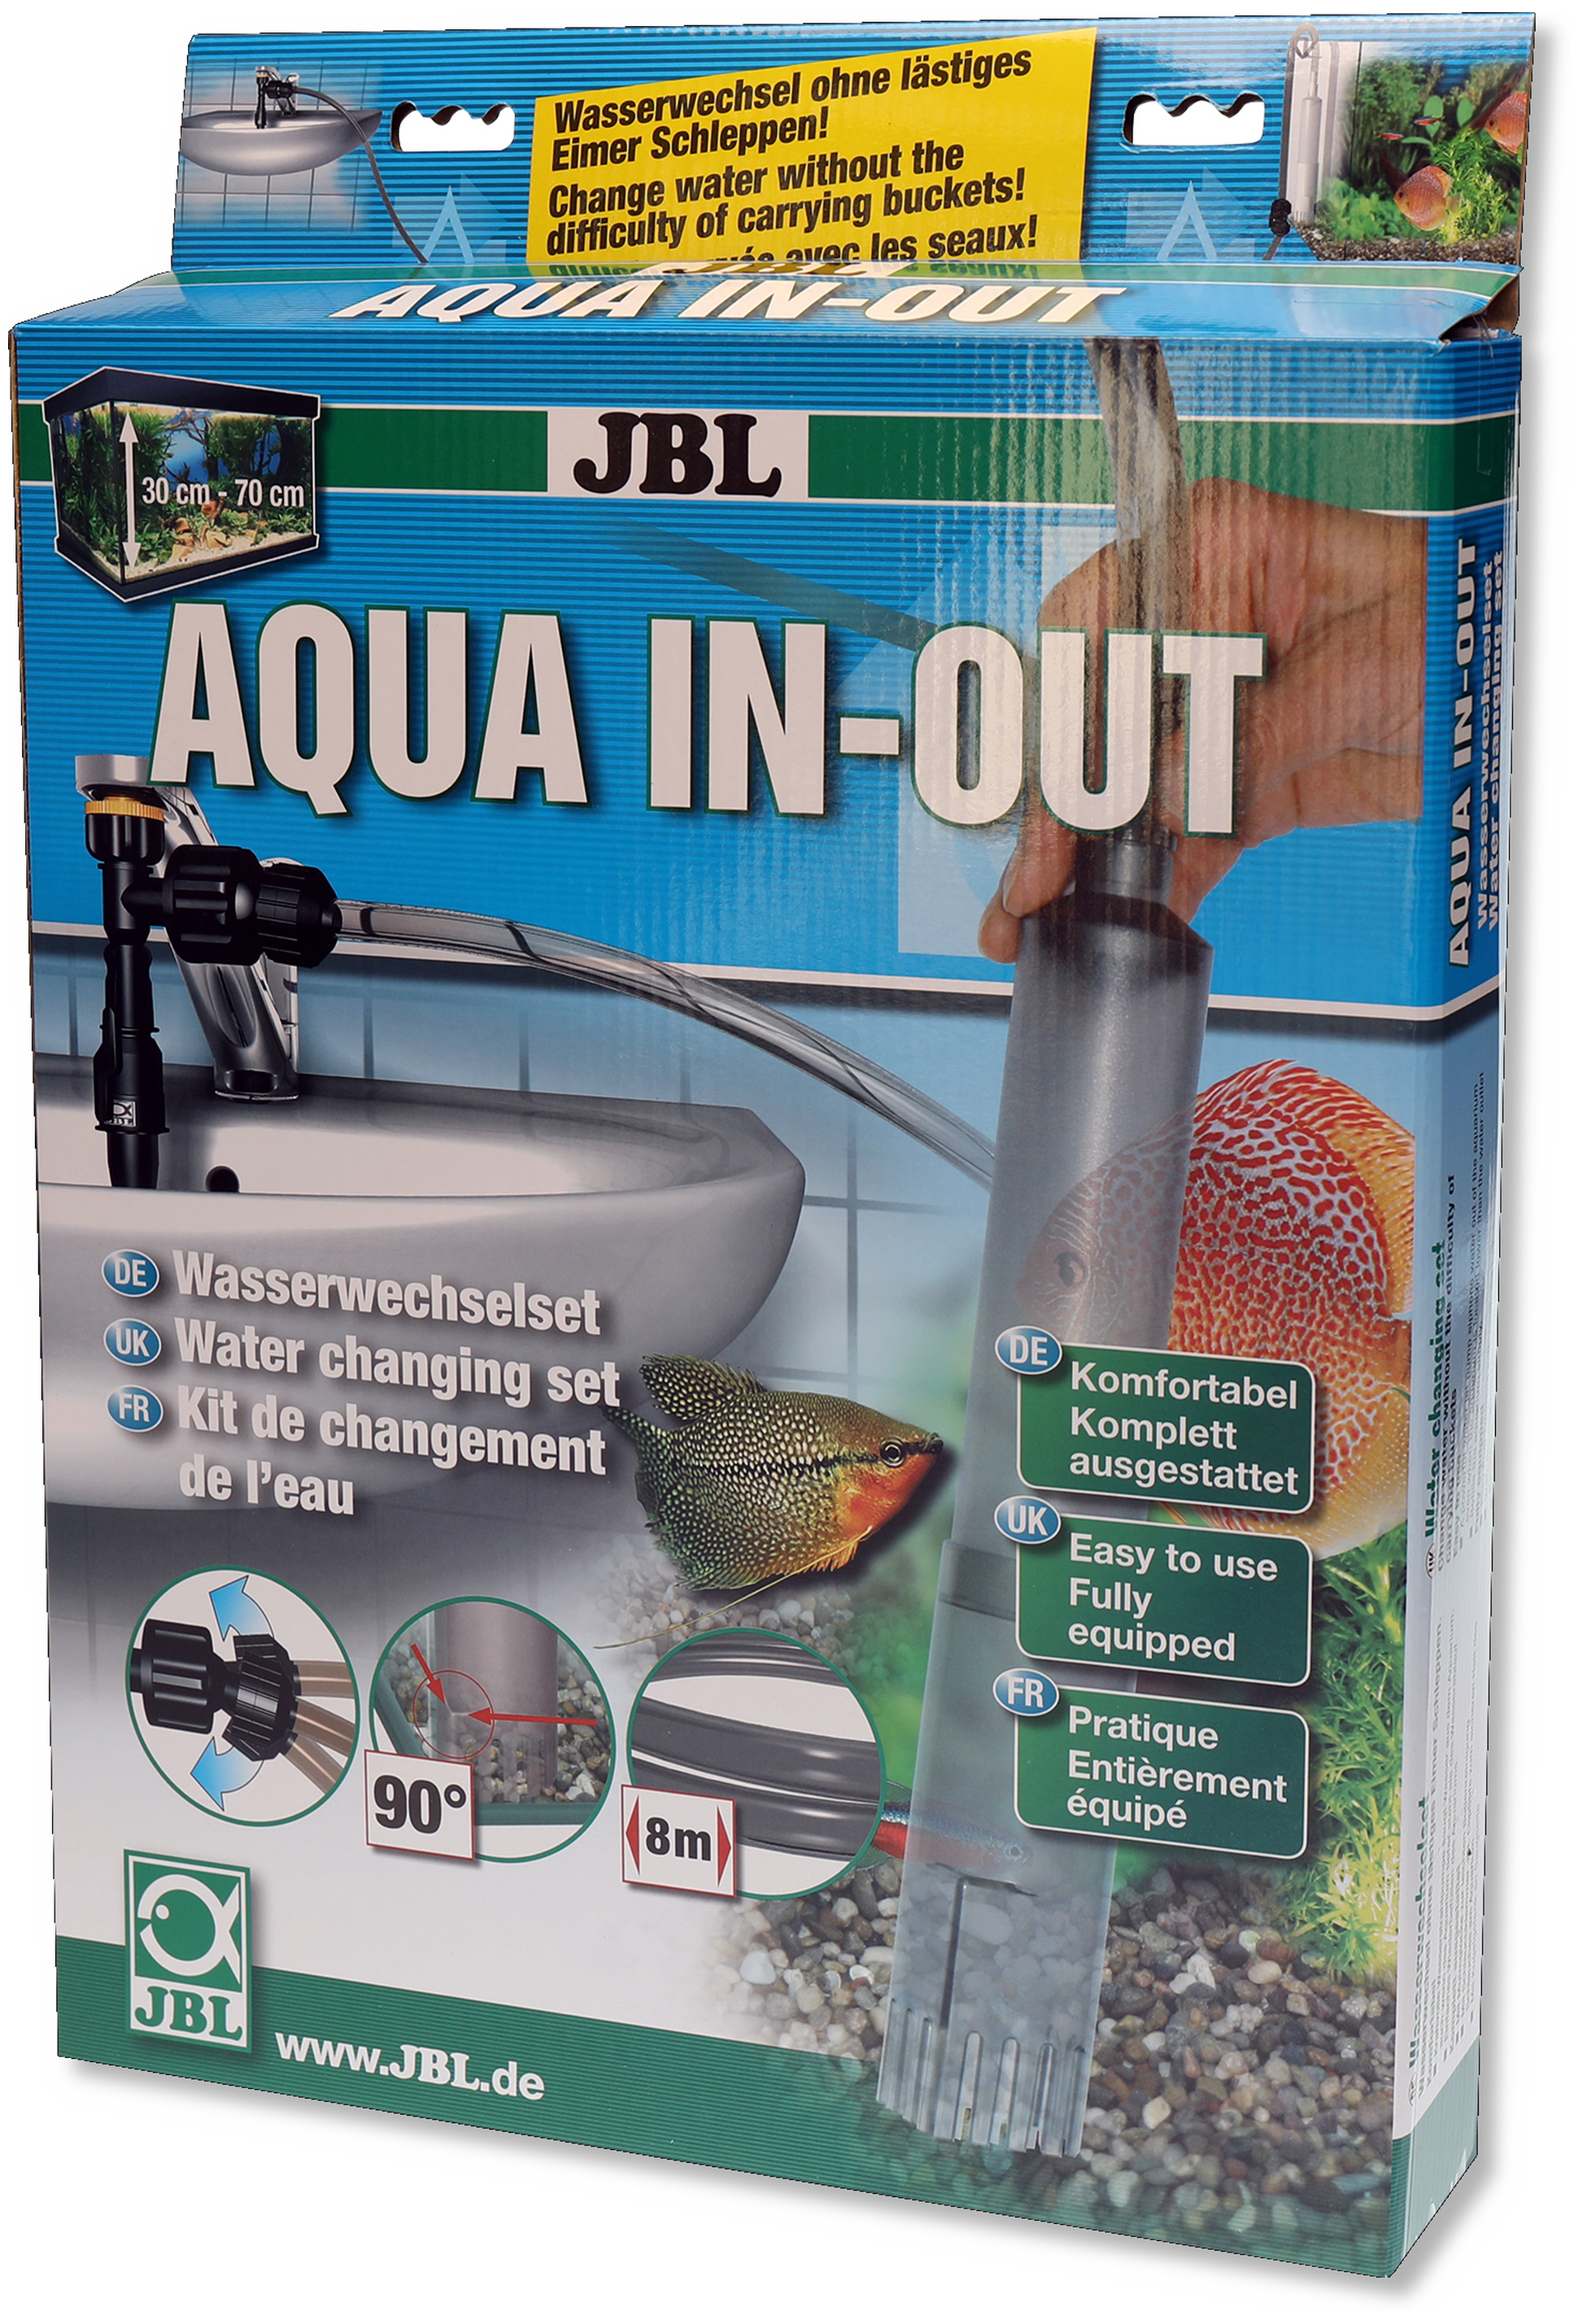 JBL Aqua In Complete Water changing kit for aquariums to connect to the water tap